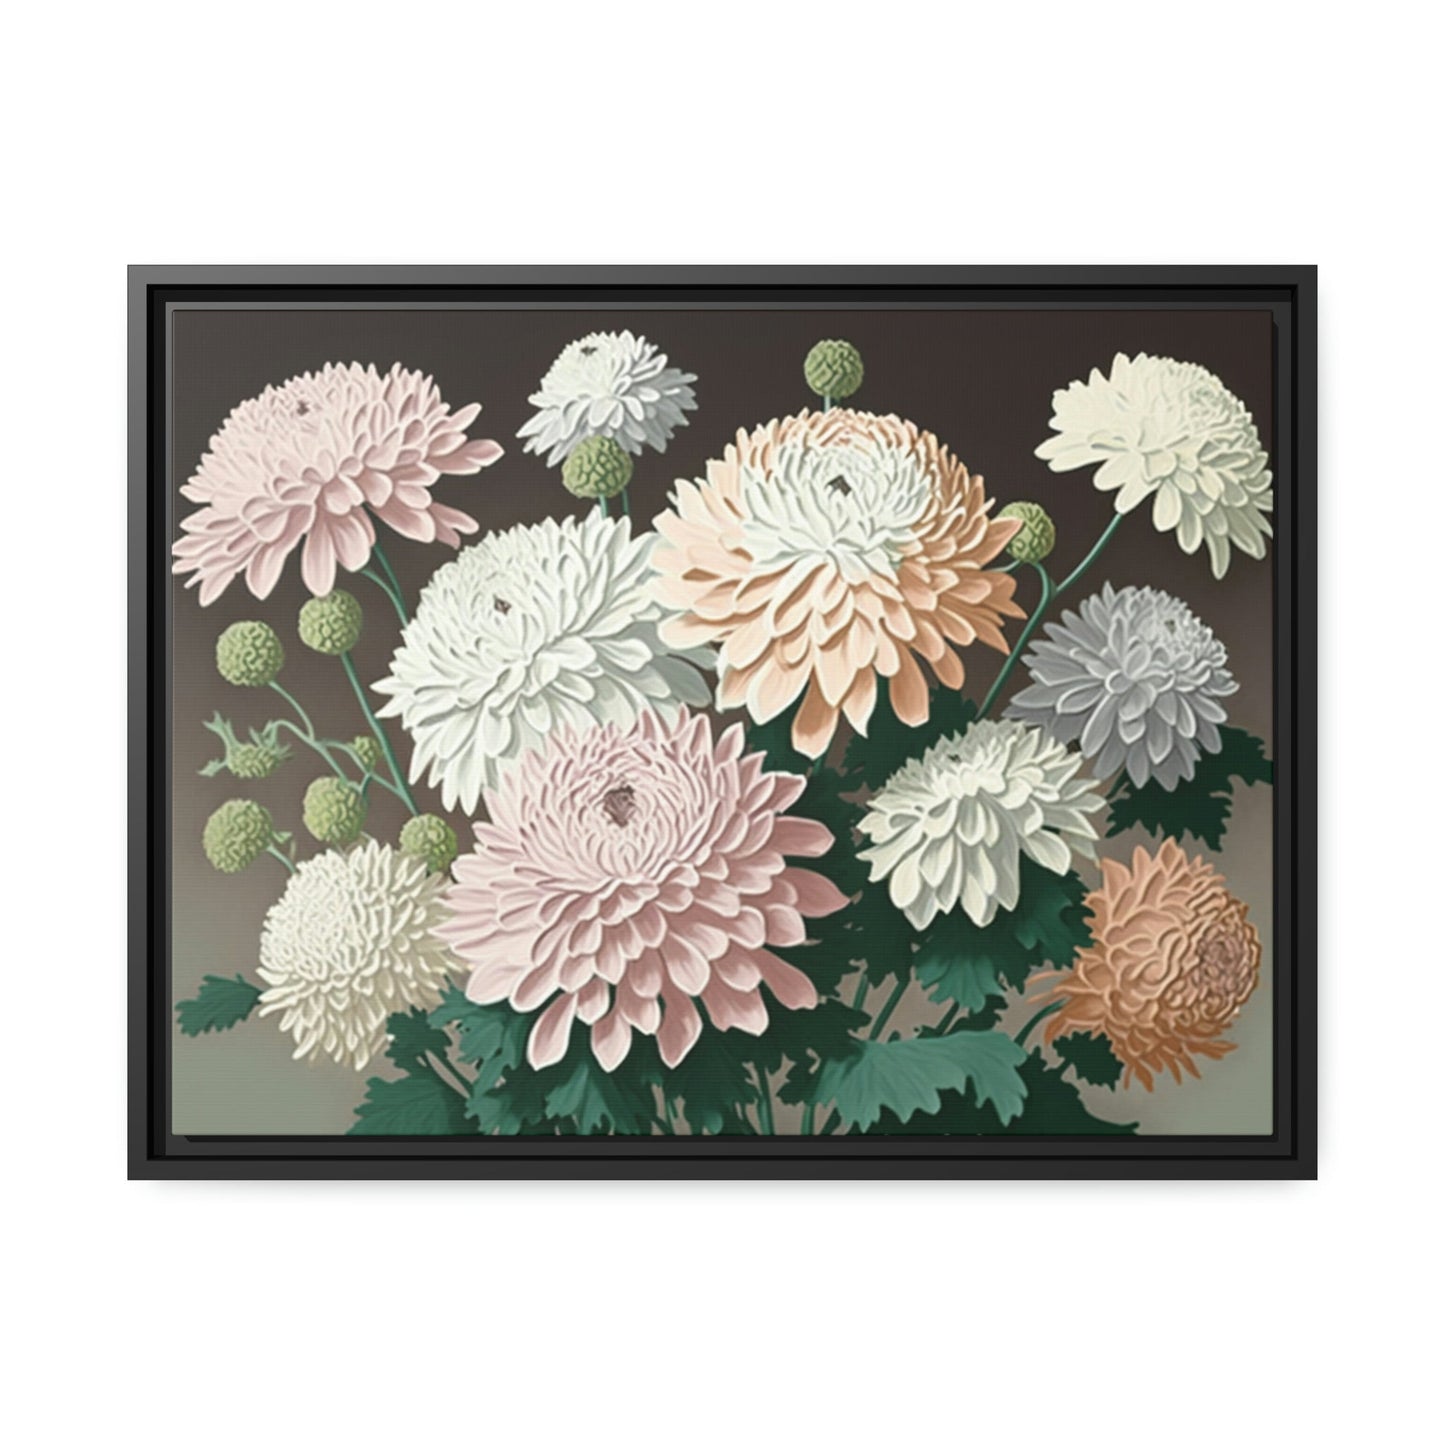 Chrysanthemum Dreams: Framed Poster with Serene Floral Imagery